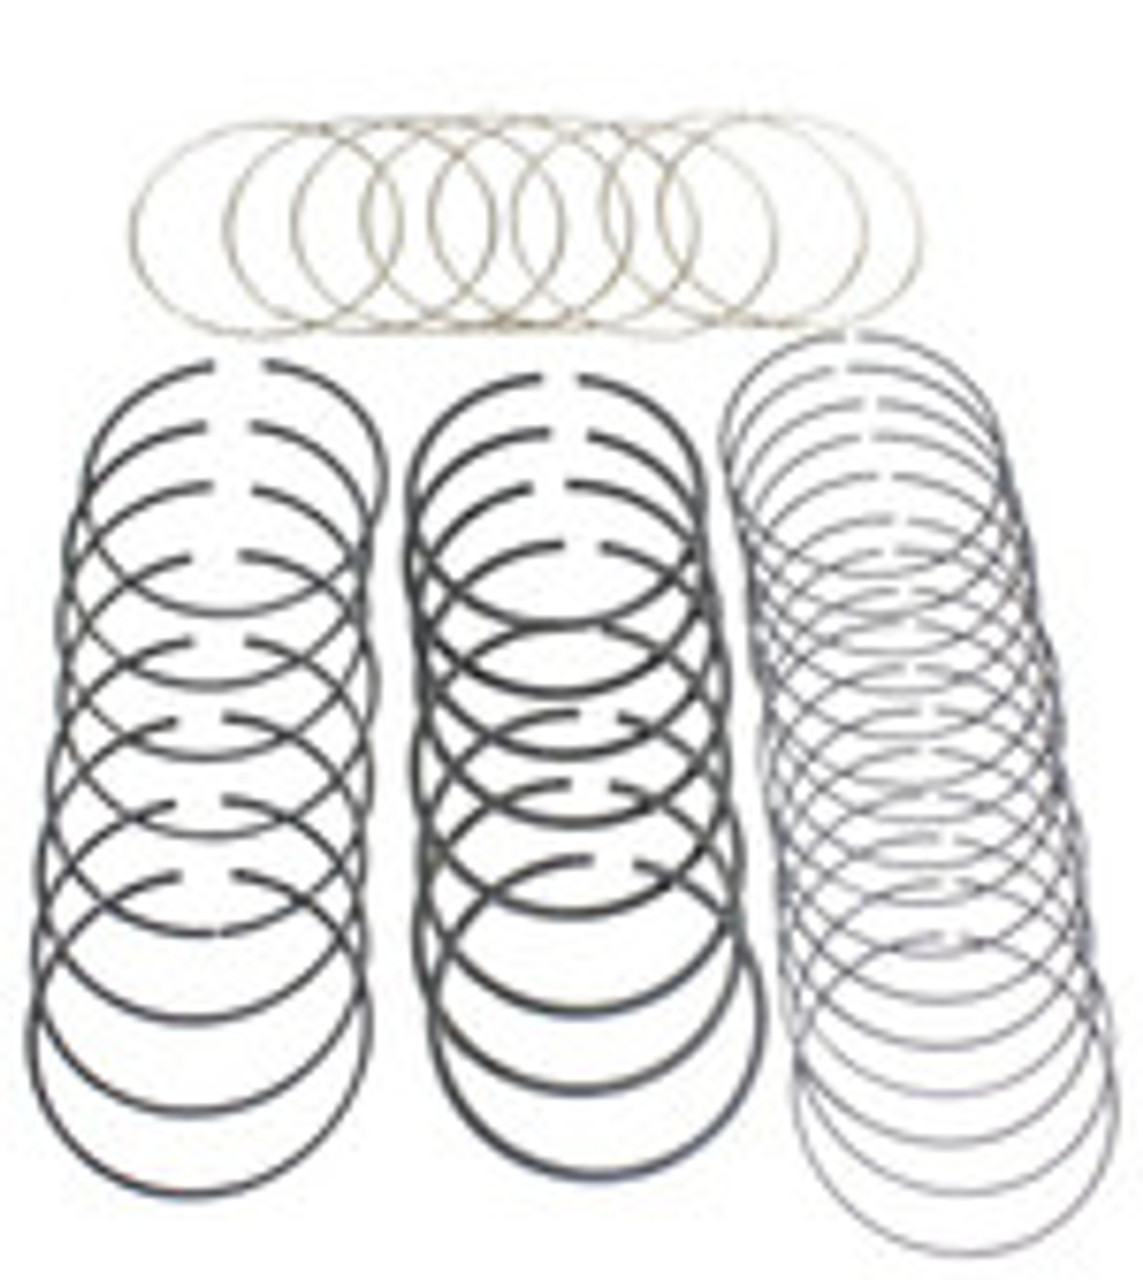 Piston Ring Set - 2014 Ford Expedition 5.4L Engine Parts # PR4150ZE367